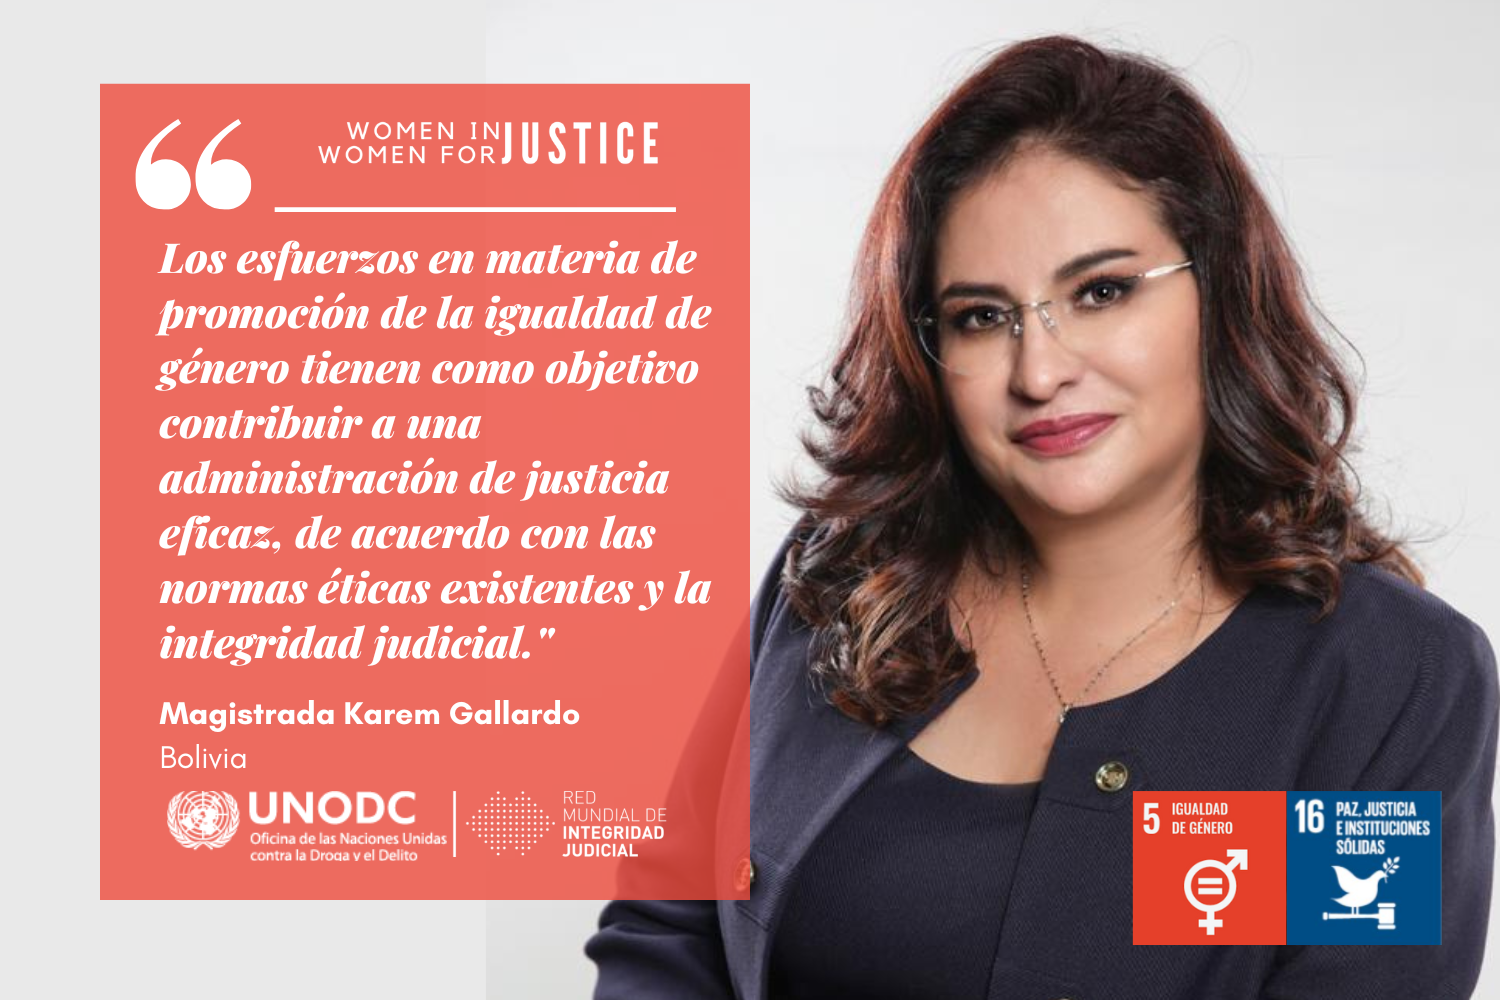 Good practices in promoting gender equality in the administration of justice in Bolivia